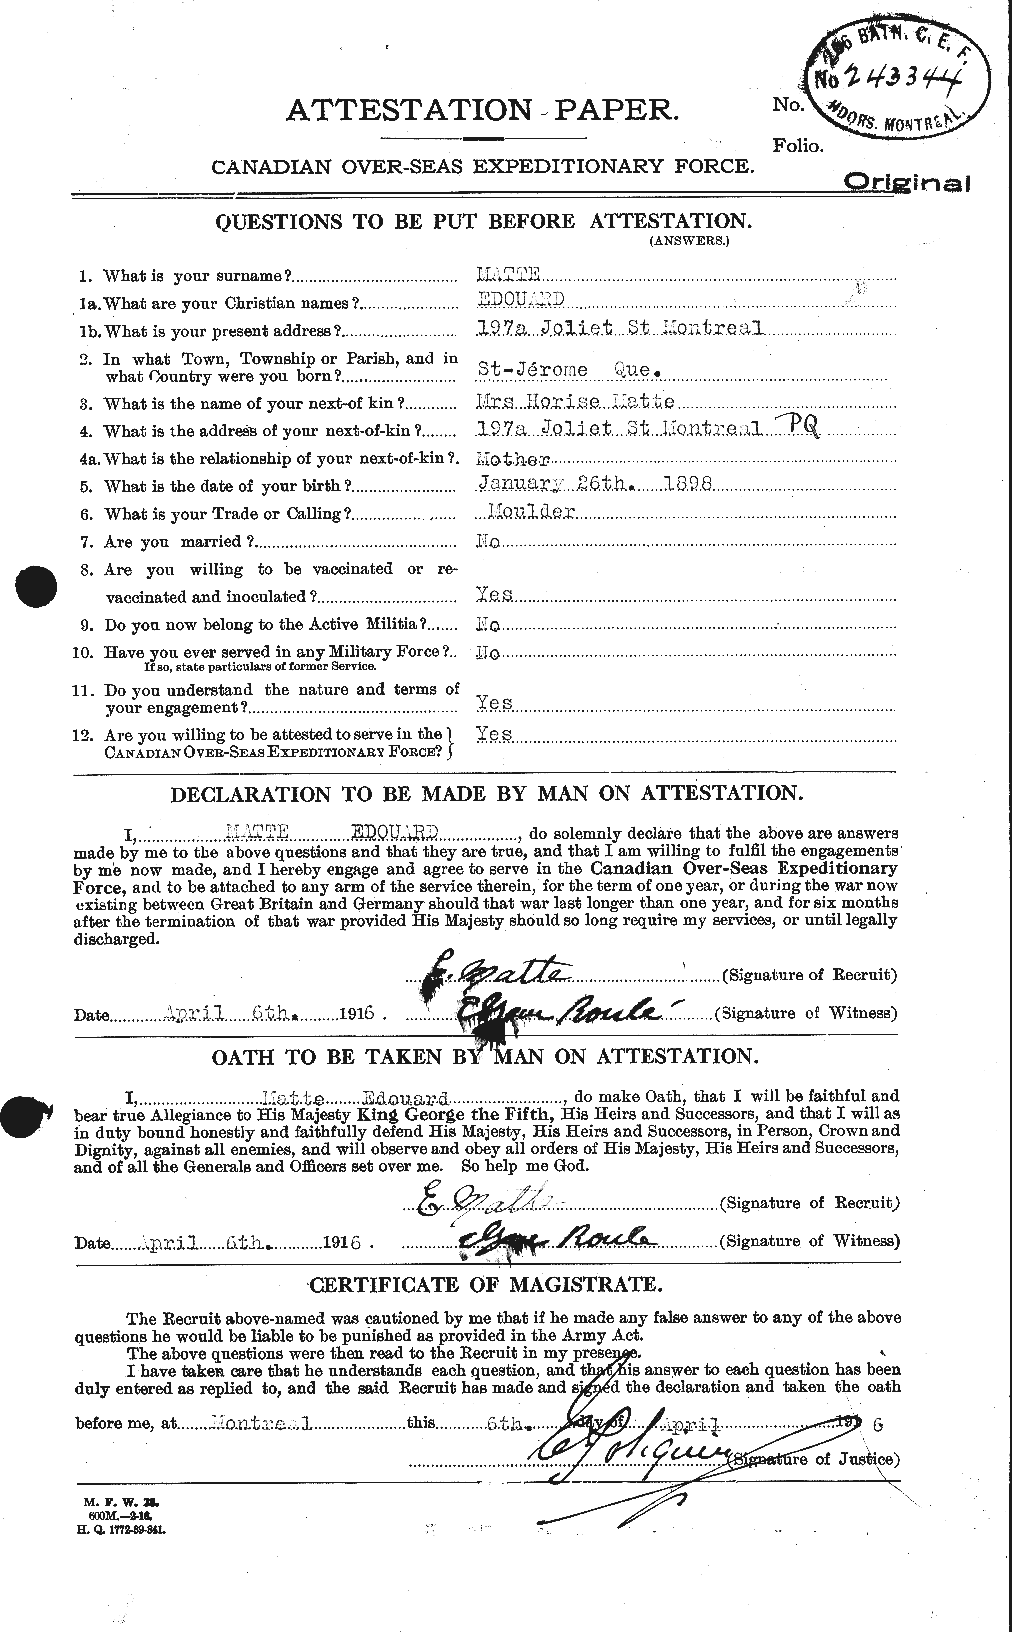 Personnel Records of the First World War - CEF 490173a